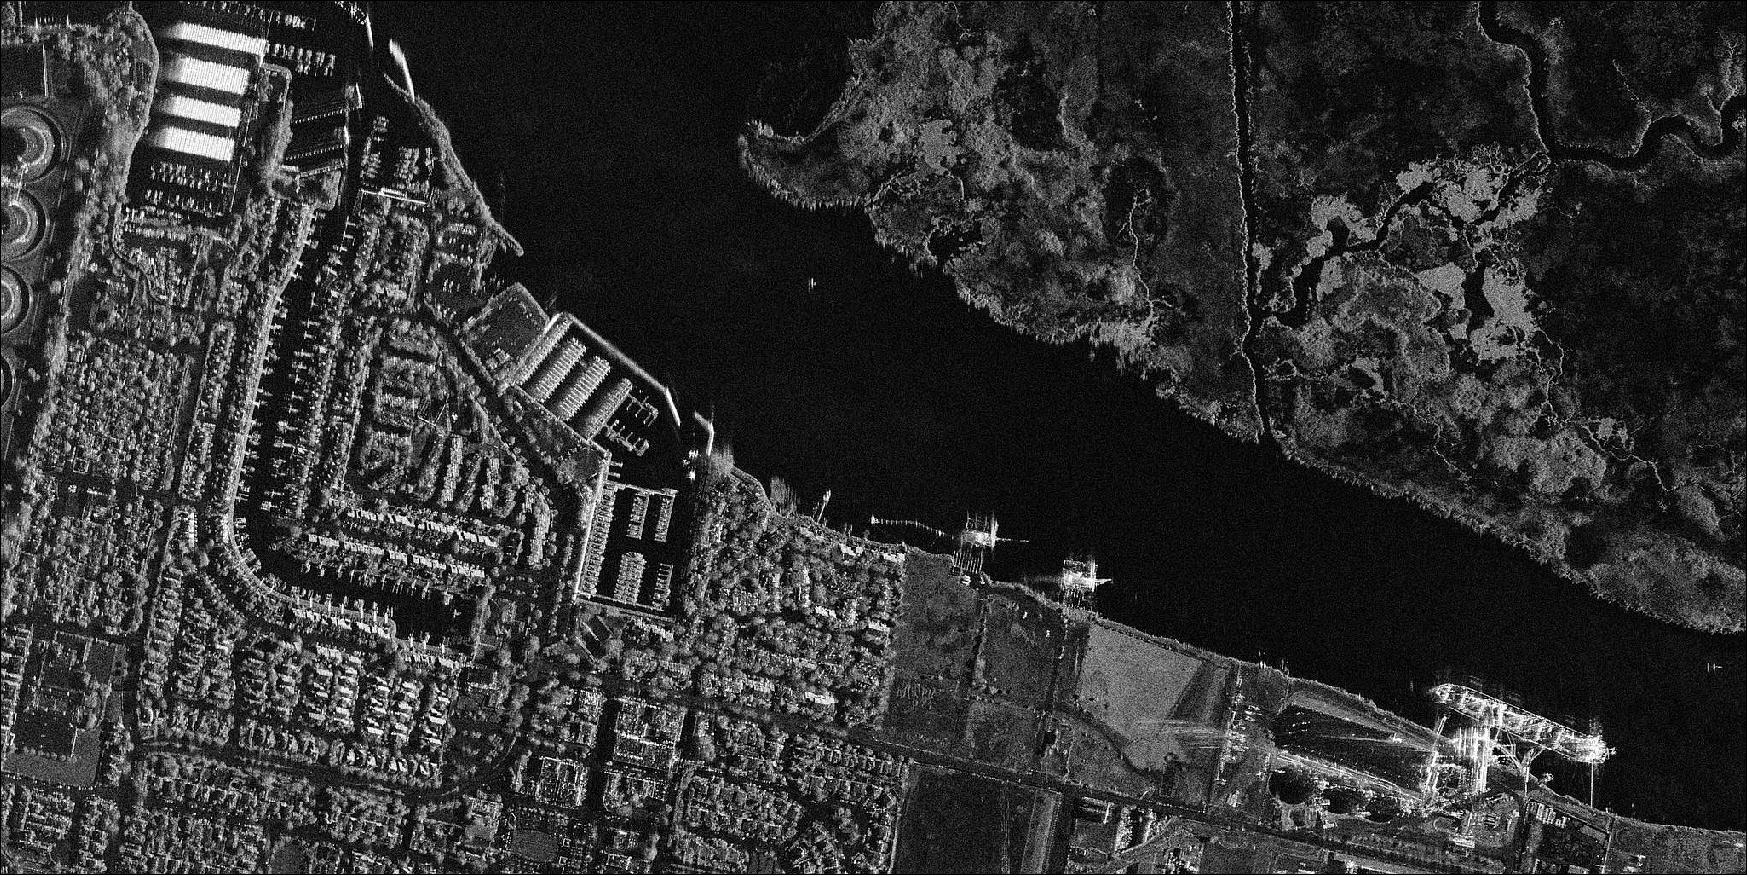 Figure 25: Capella-1 image of Pittsburg, California (located in the East Bay region of the San Francisco Bay Area) – New York Point, Pittsburg Marina, Koch Carbon, Residential Neighborhood (image credit: Capella Space) 34)